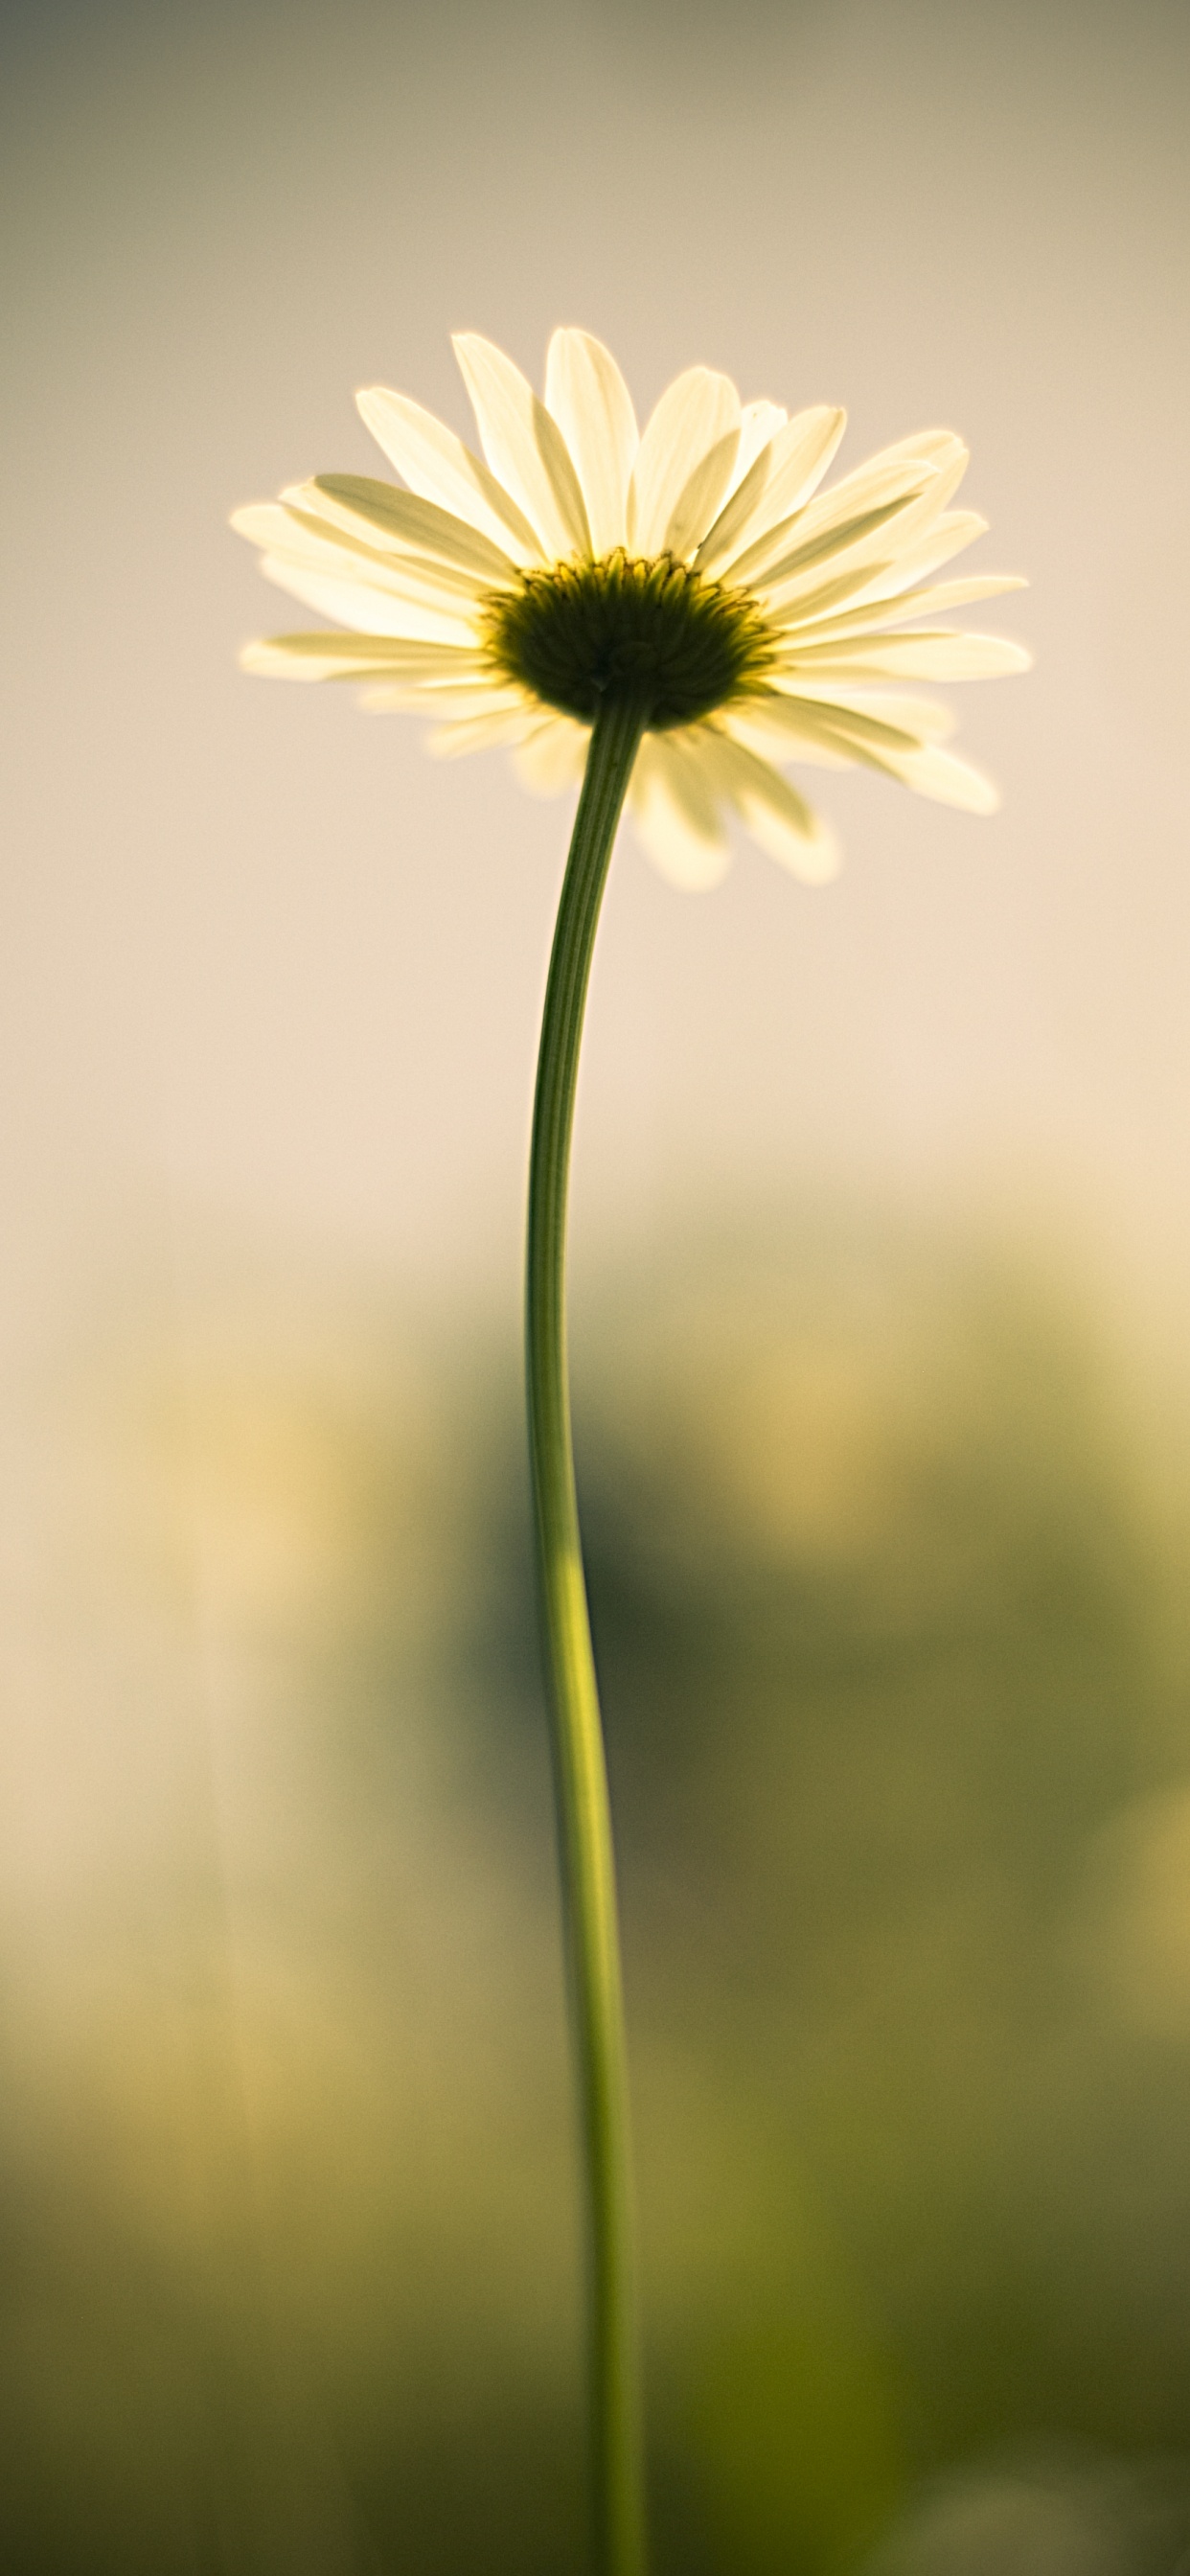 White and Yellow Daisy in Bloom. Wallpaper in 1242x2688 Resolution